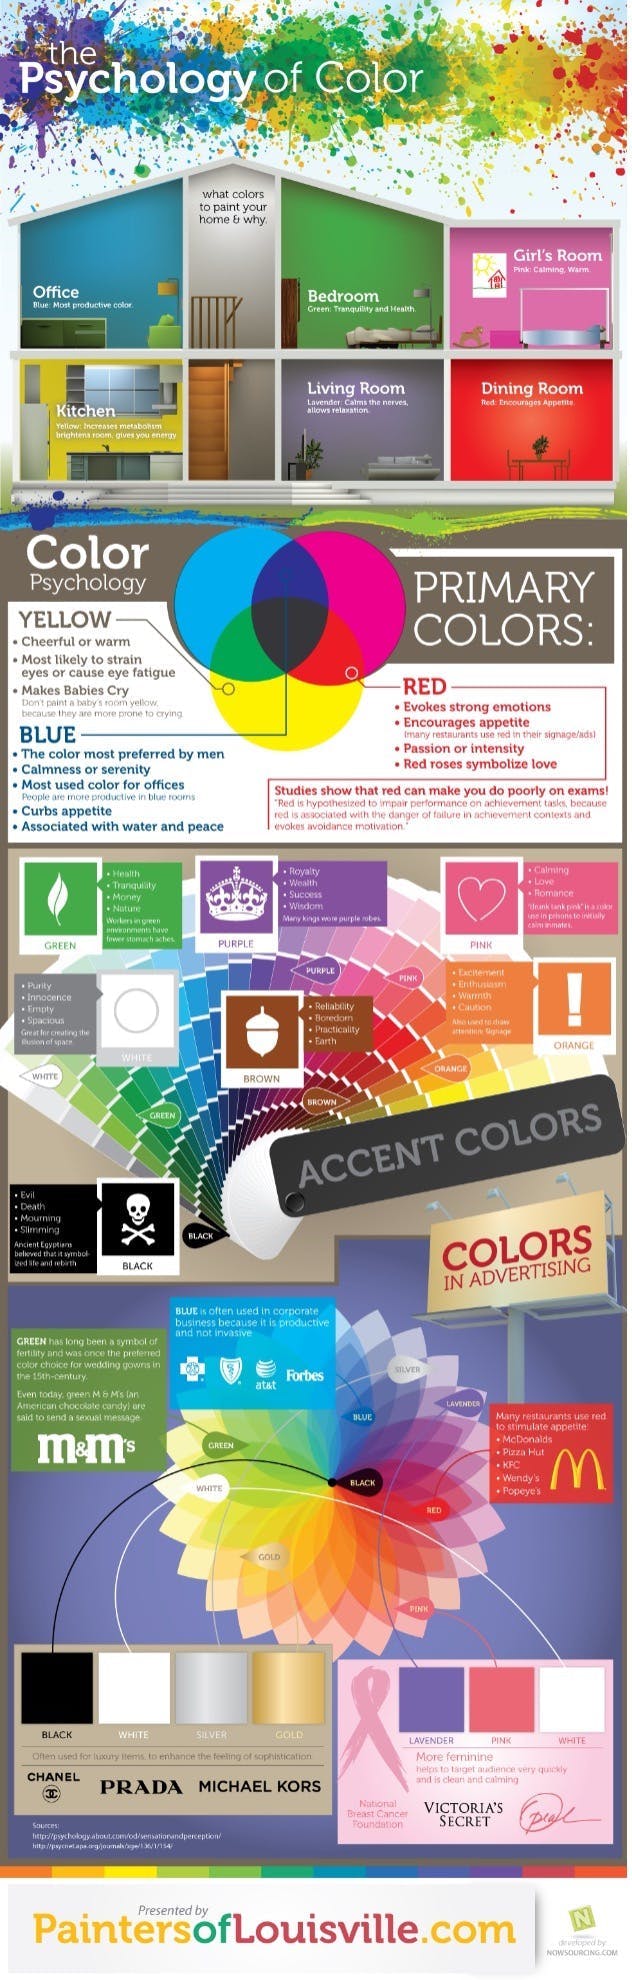 Psychology of color infographic.